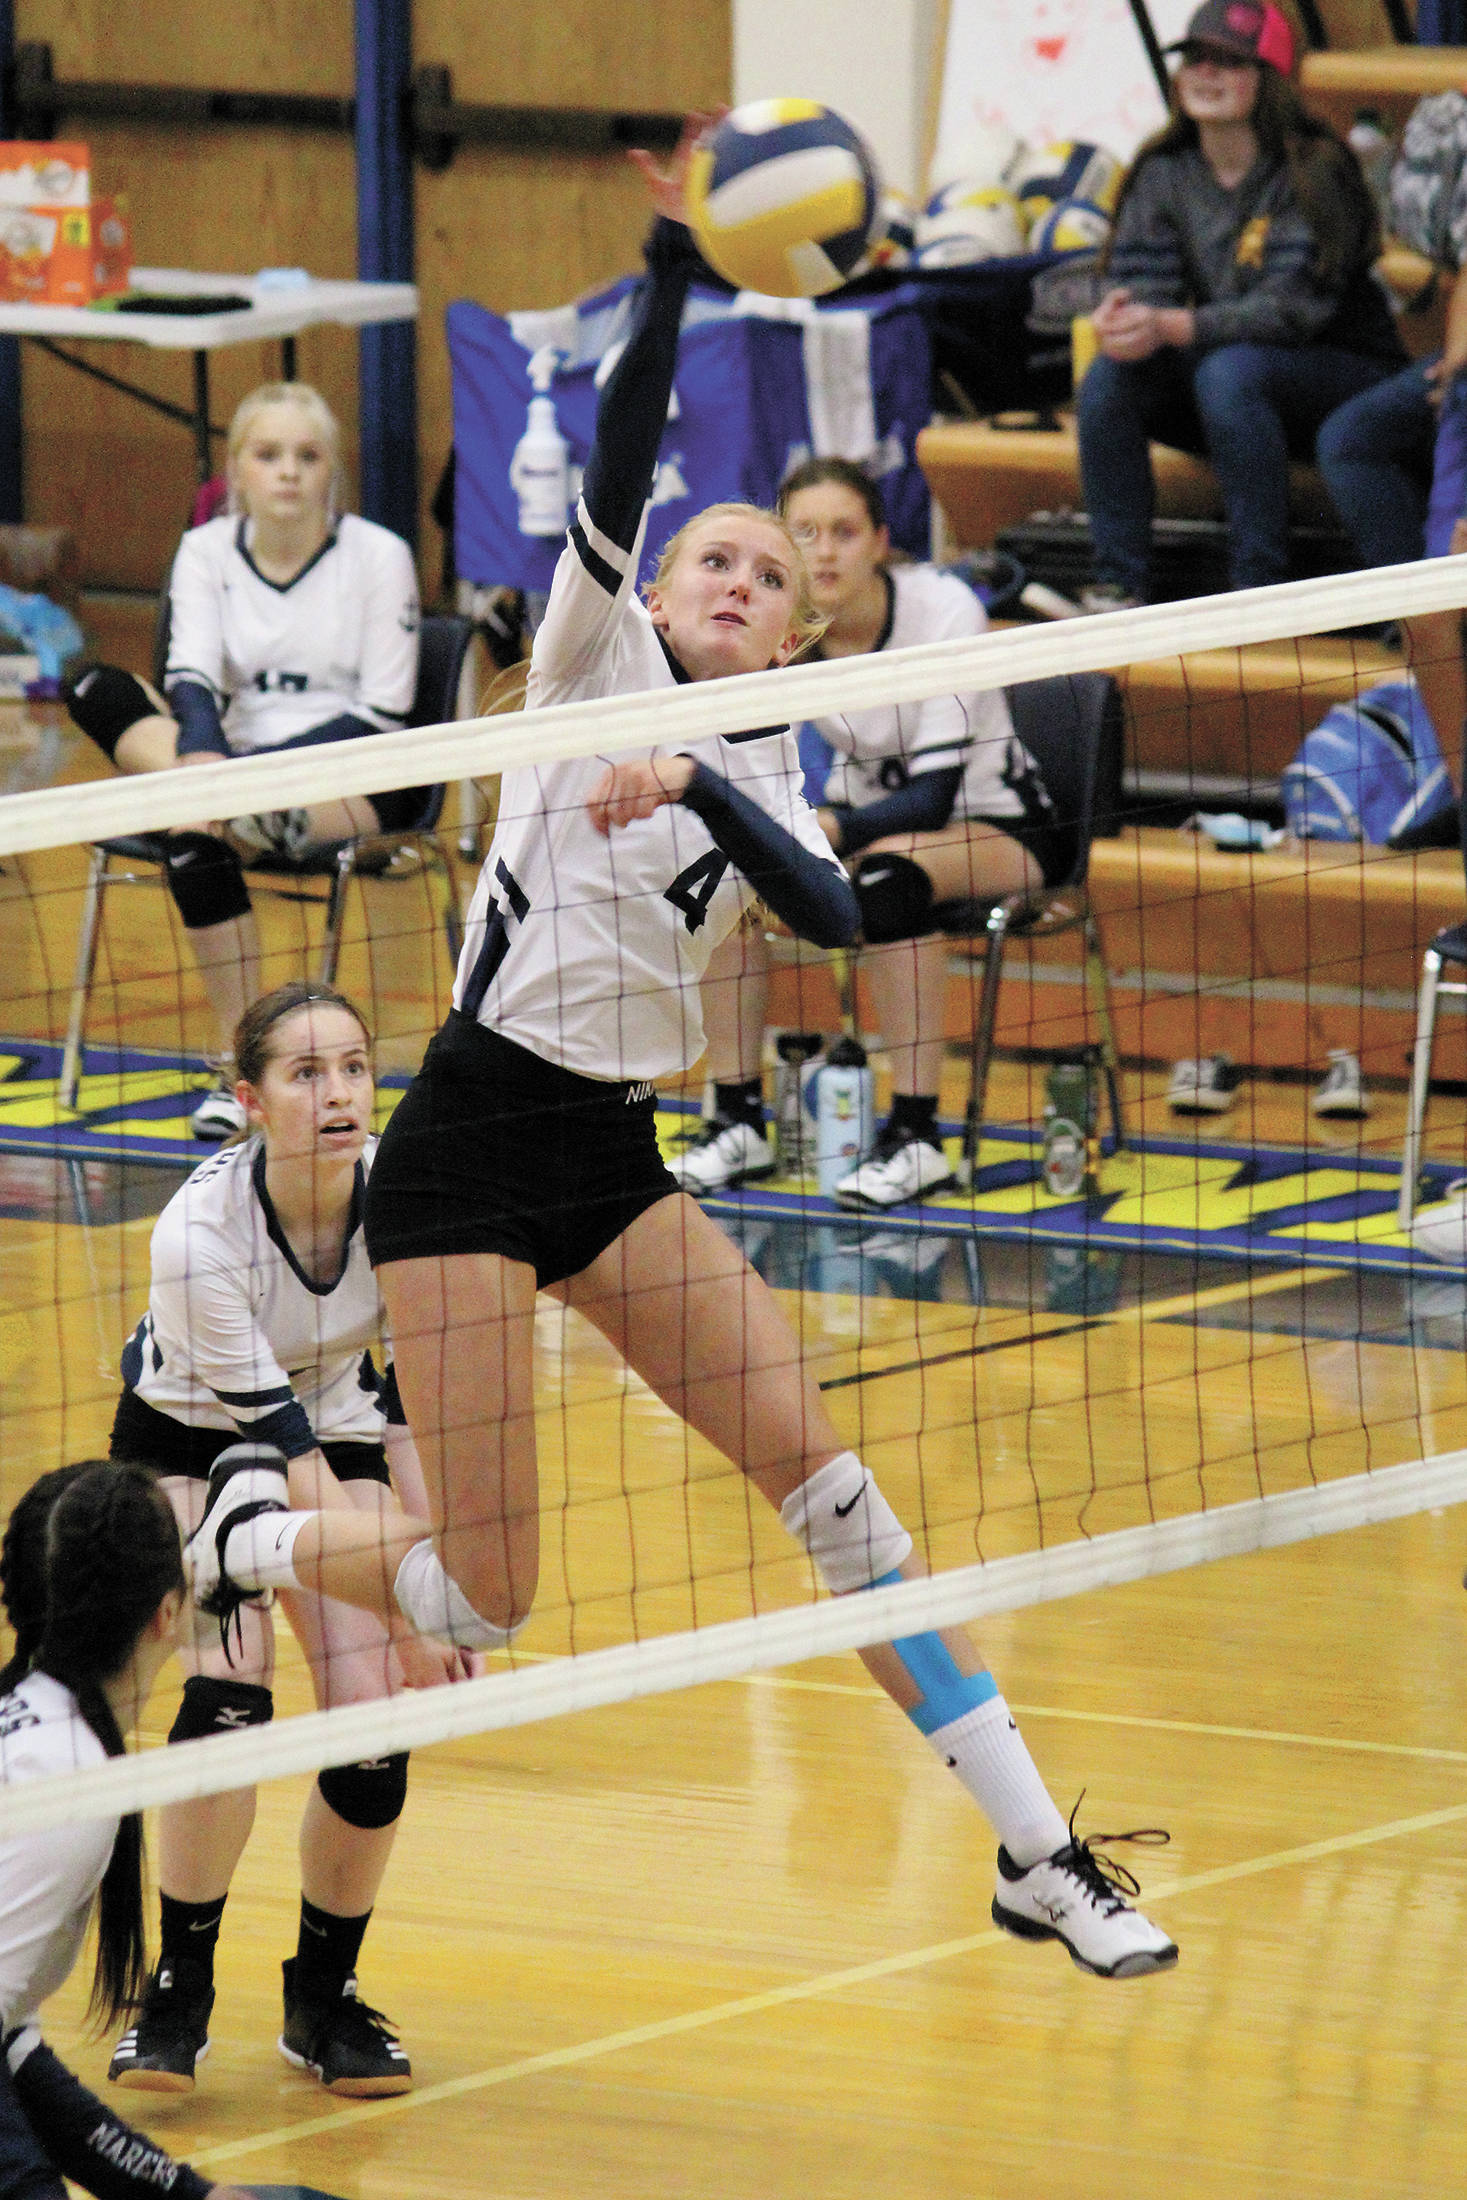 Homer’s Gracie Gummer spikes the ball during a Tuesday, Sept. 22, 2020 volleyball game against Soldotna High School in the Alice Witte Gymnasium in Homer, Alaska. (Photo by Megan Pacer/Homer News)